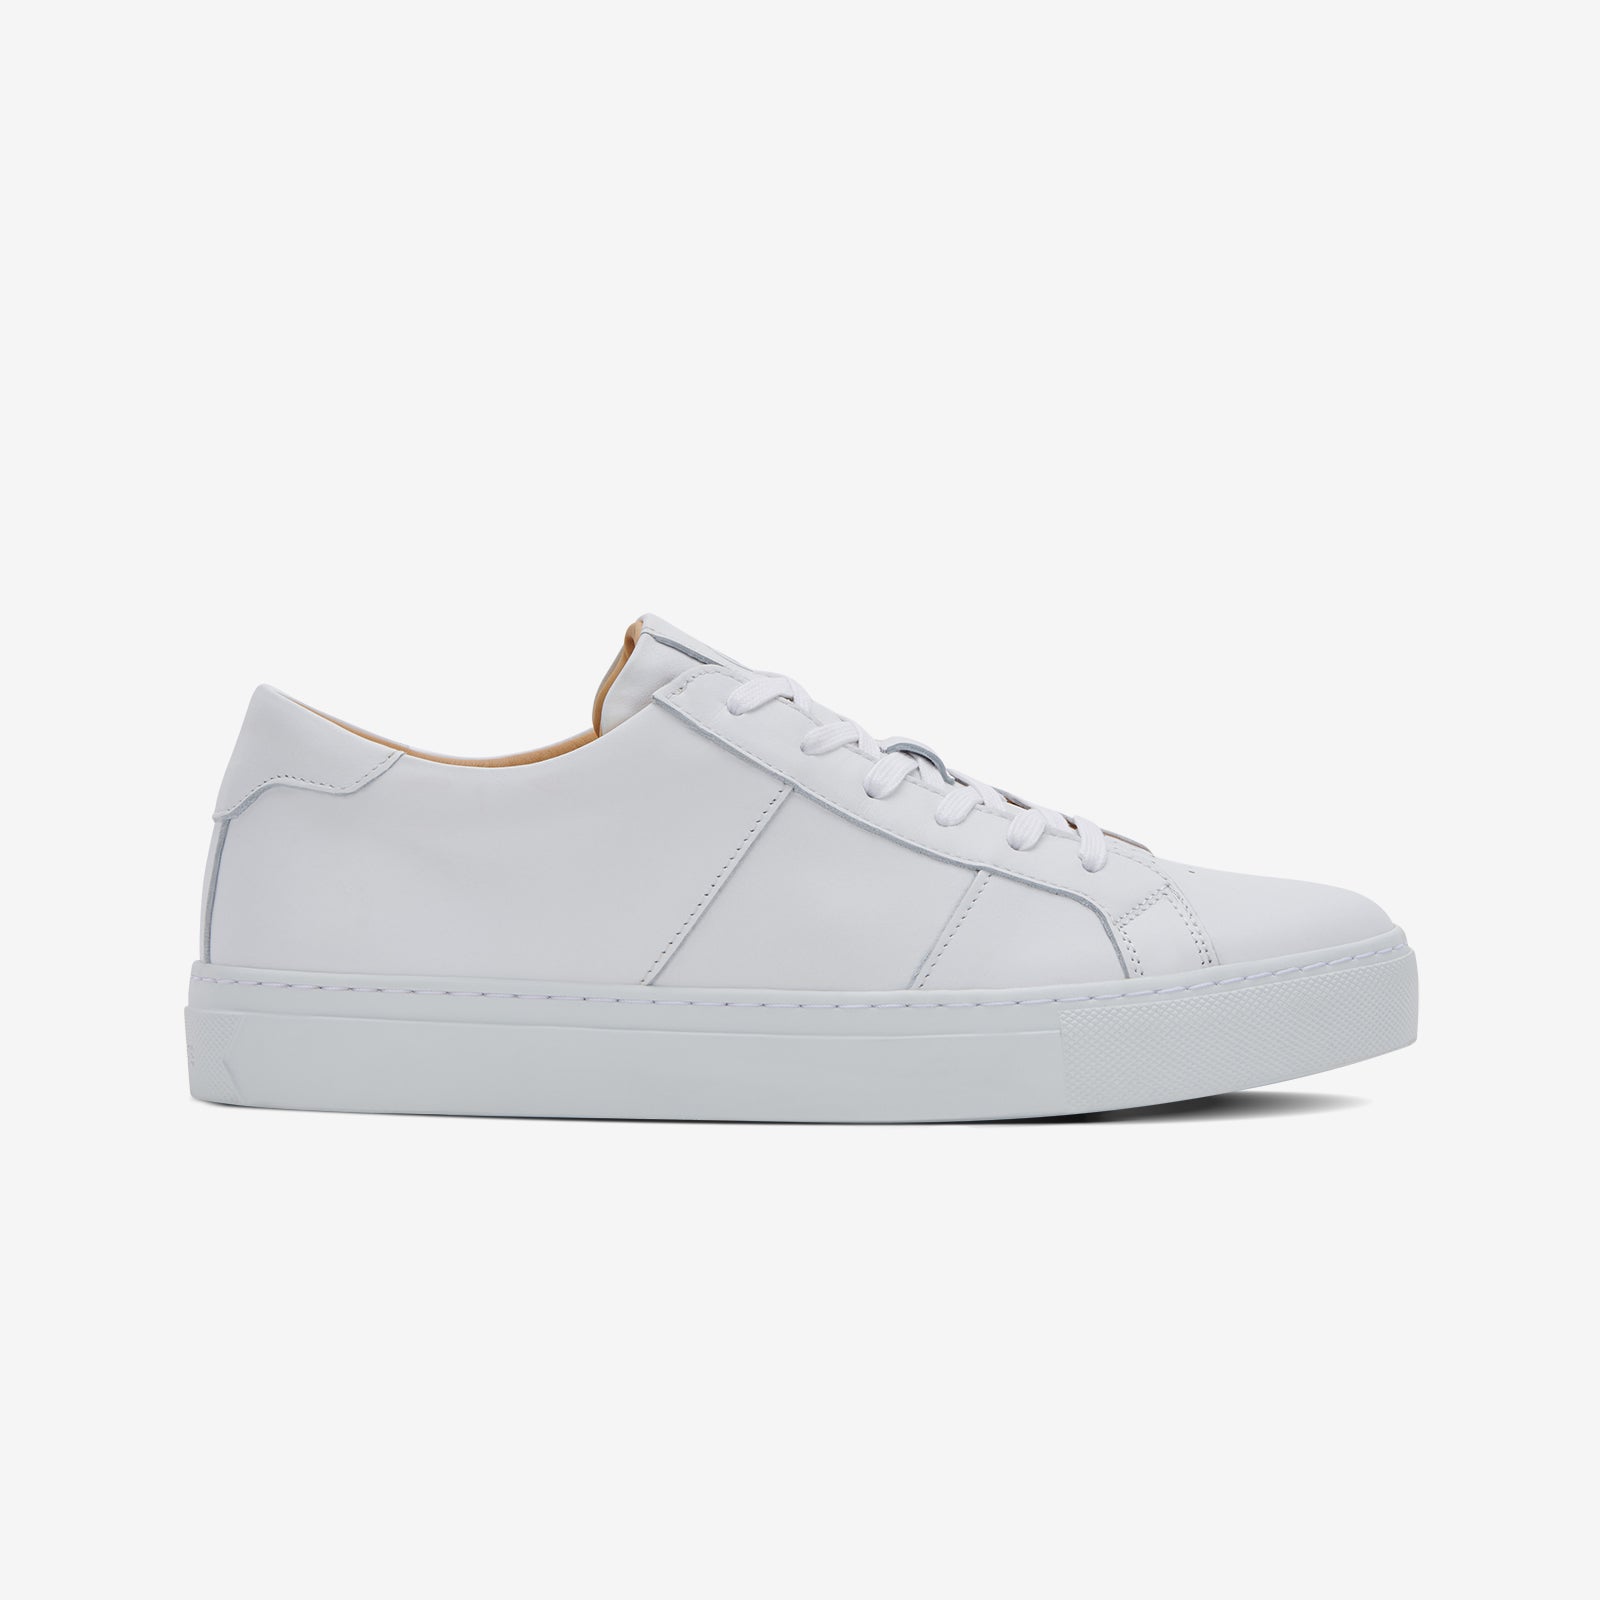 Off-White - Men - Out of Office Leather Sneakers Black - EU 39